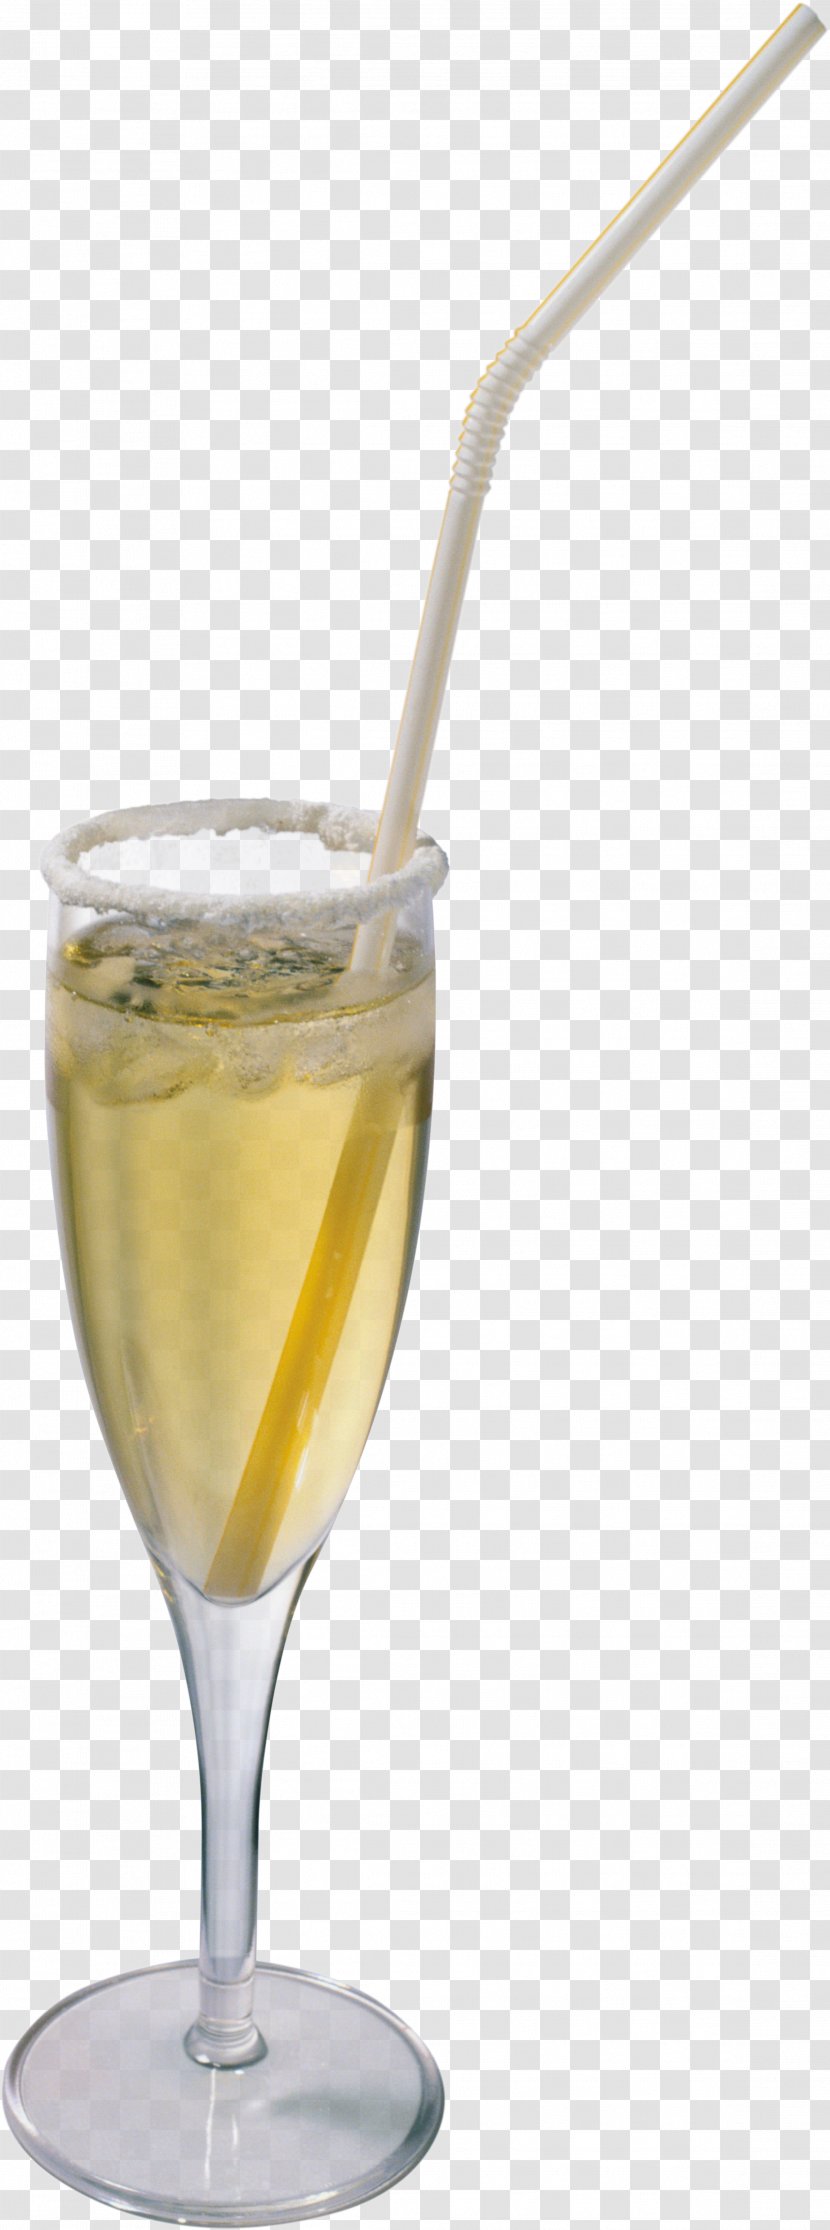 Cocktail Juice Champagne Cup Drink - Wine Glass Transparent PNG